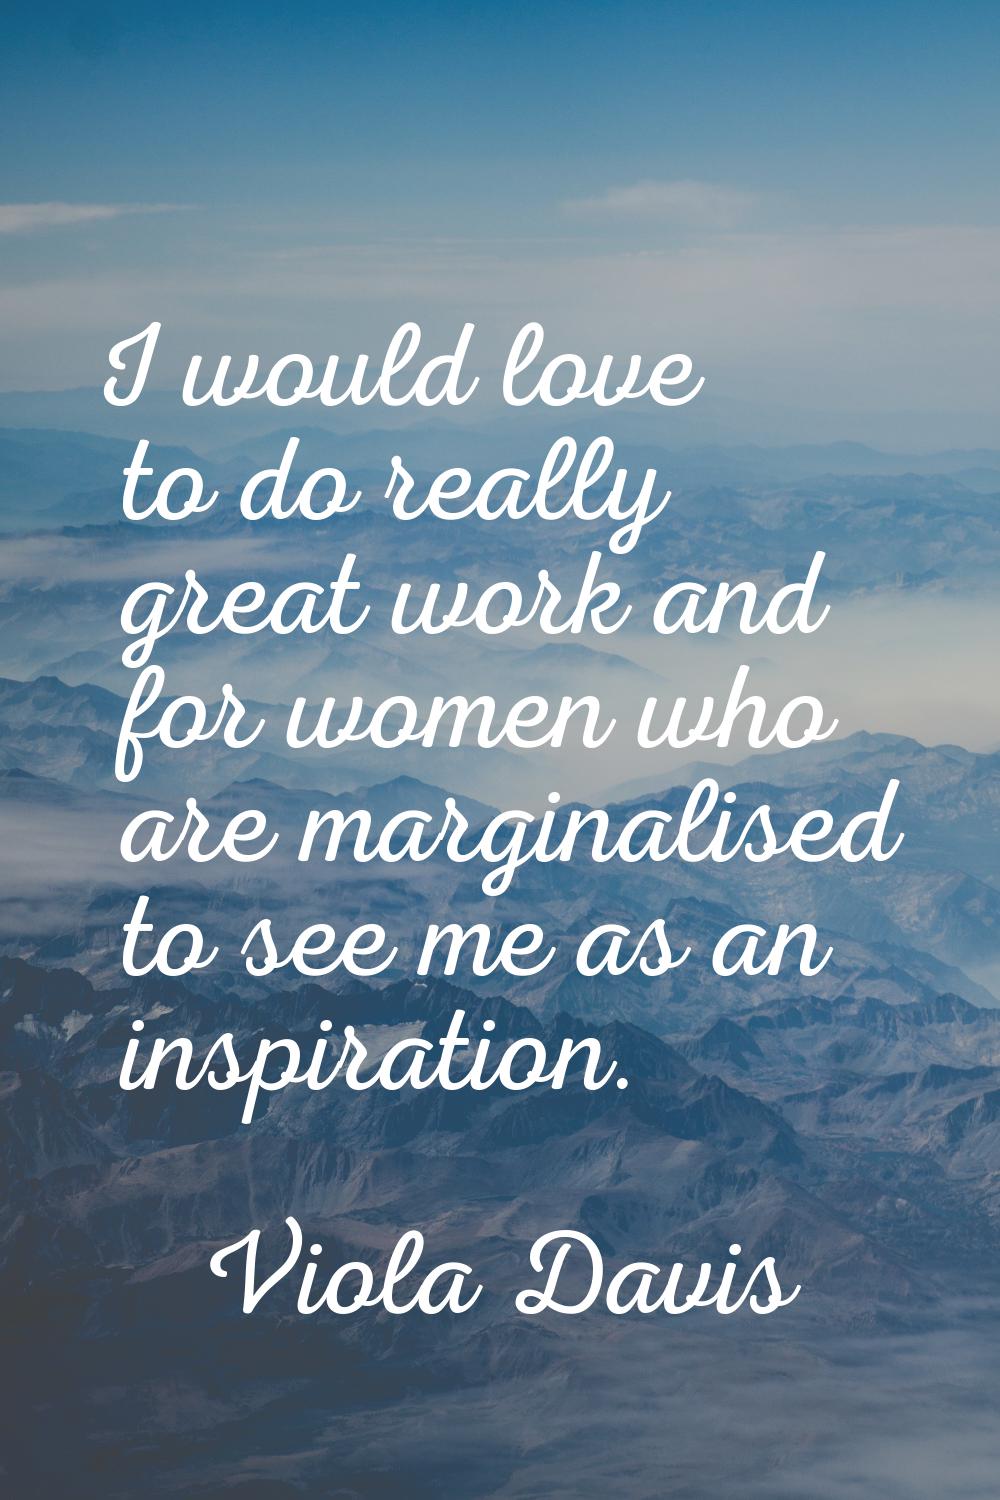 I would love to do really great work and for women who are marginalised to see me as an inspiration